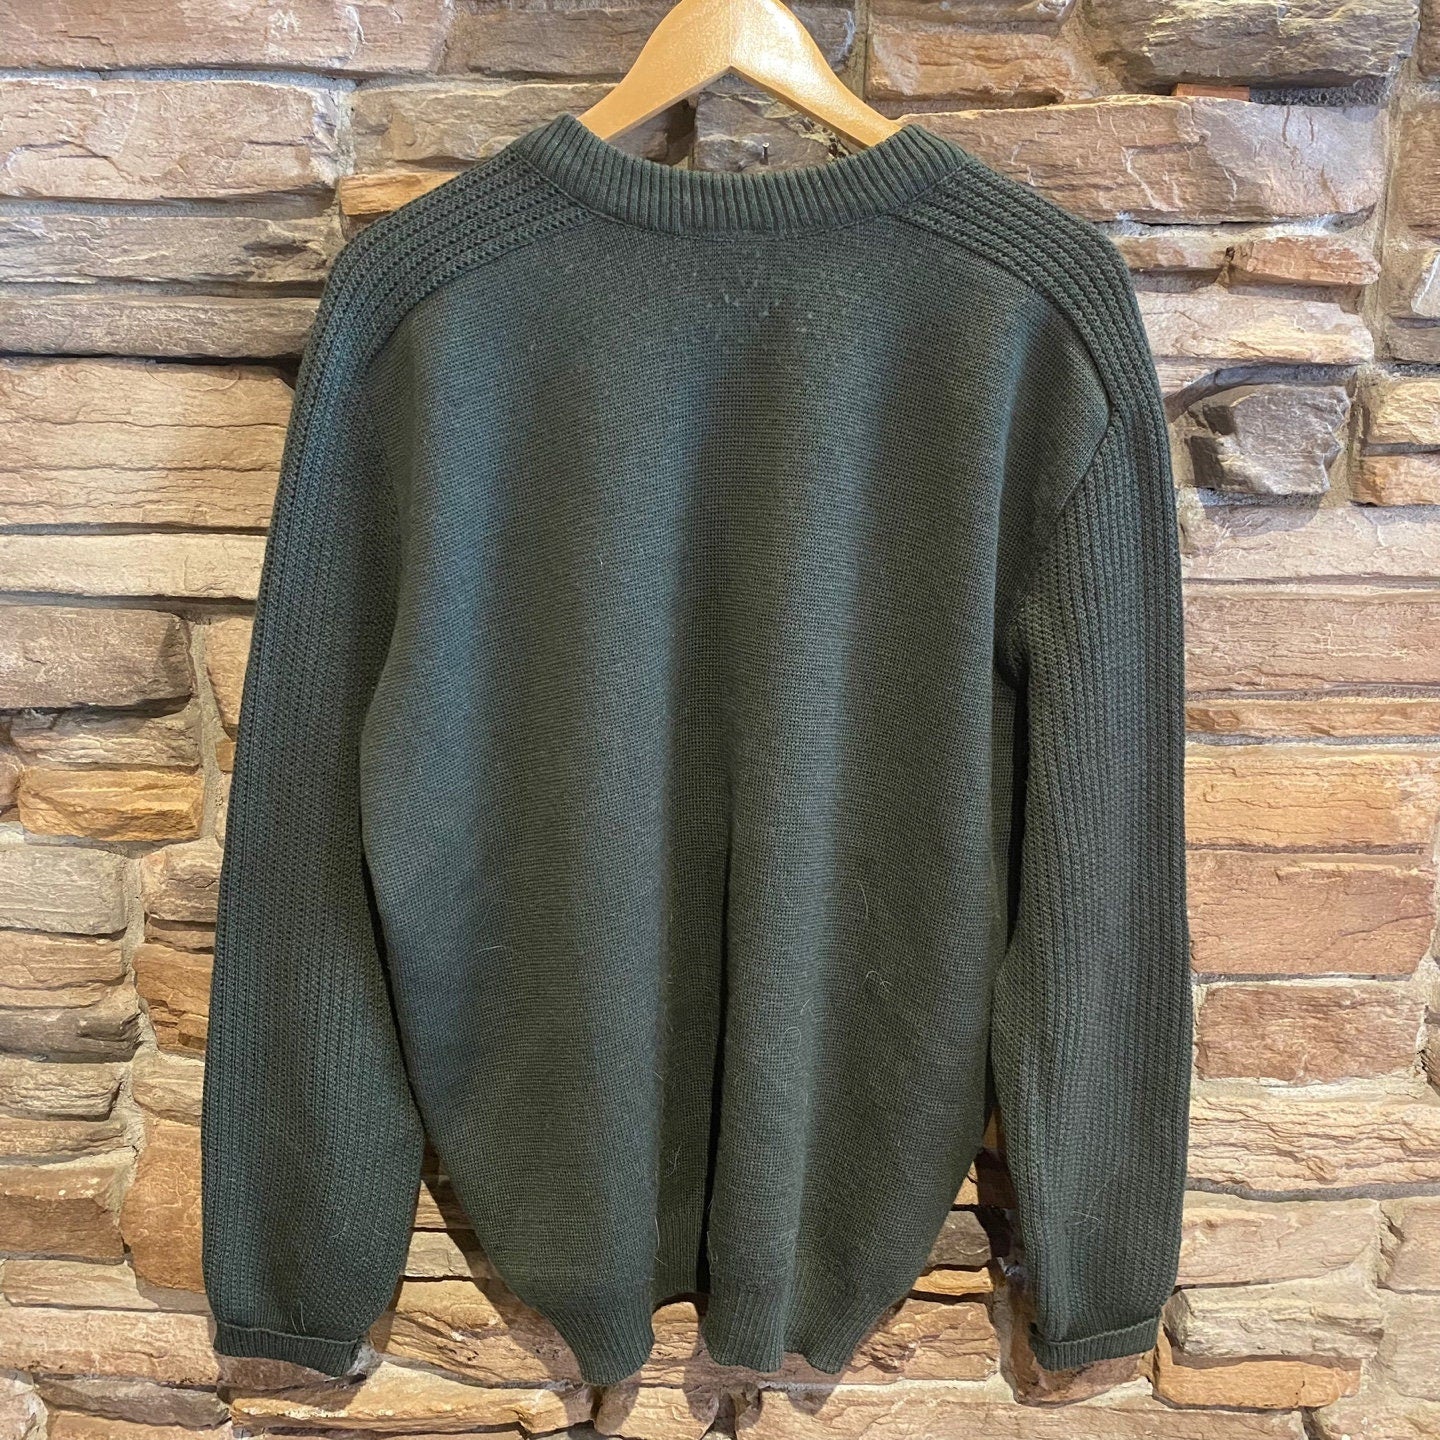 Vintage Barbour Made in England Green Wool Sweater | Vintage Sweater | Barbour Sweater | Vintage Wool Sweater | Size 46" | SKU STQ-3215